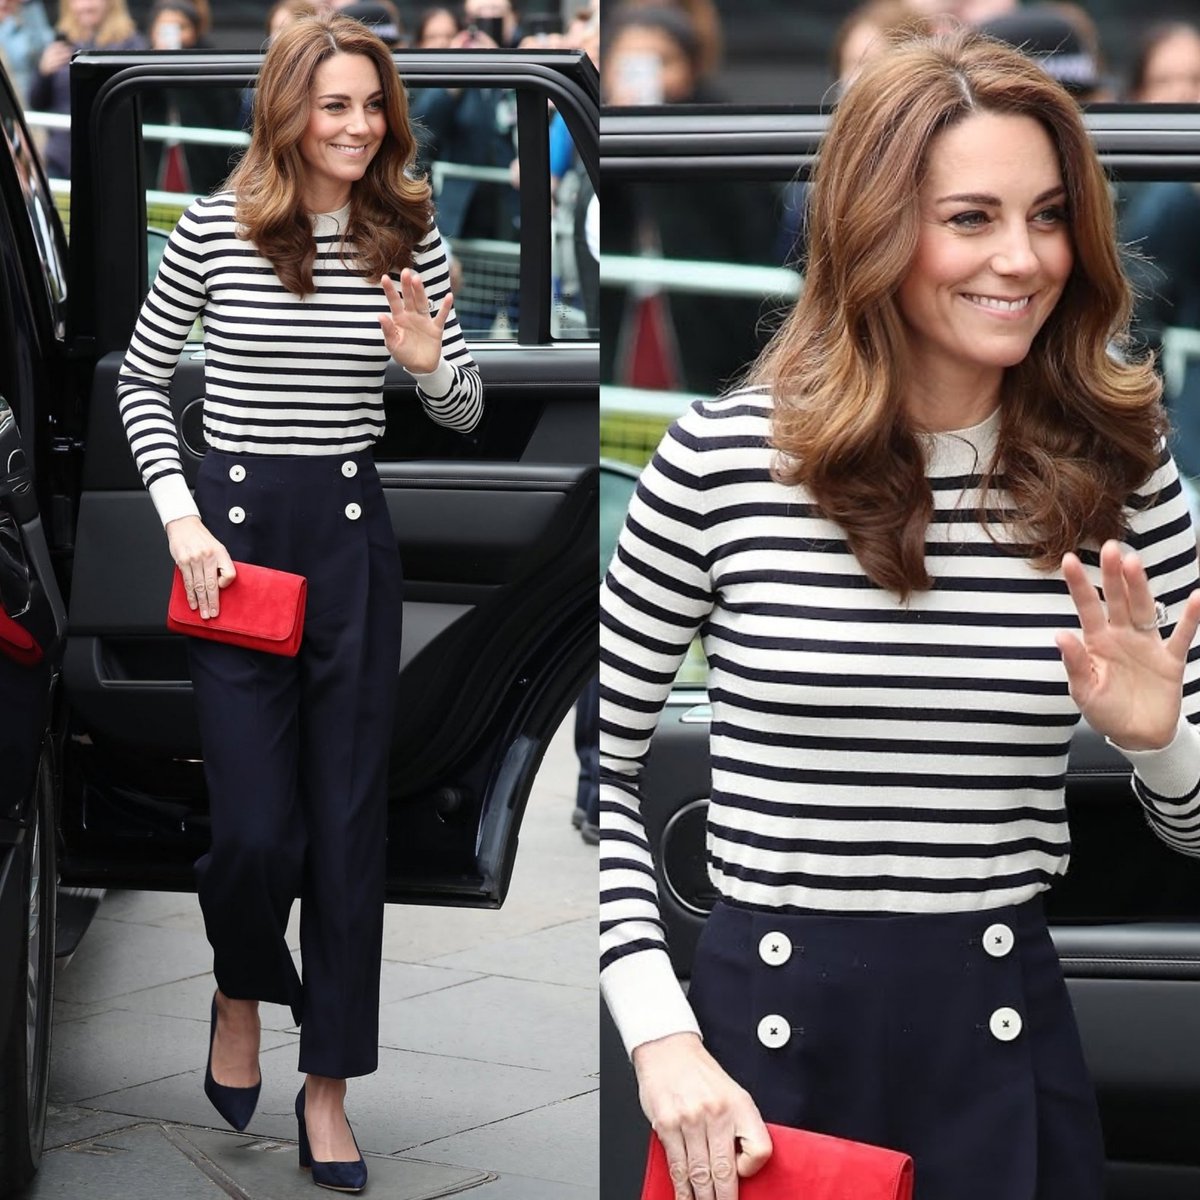 Princess Catherine is the epitome of beauty and elegance attending  the launch of the King's Cup Regatta in Greenwich on 7 May 2019.
#PrincessofWales #PrincessCatherine #CatherinePrincessOfWales #TeamCatherine #TeamWales #RoyalFamily #IStandWithCatherine #CatherineWeLoveYou